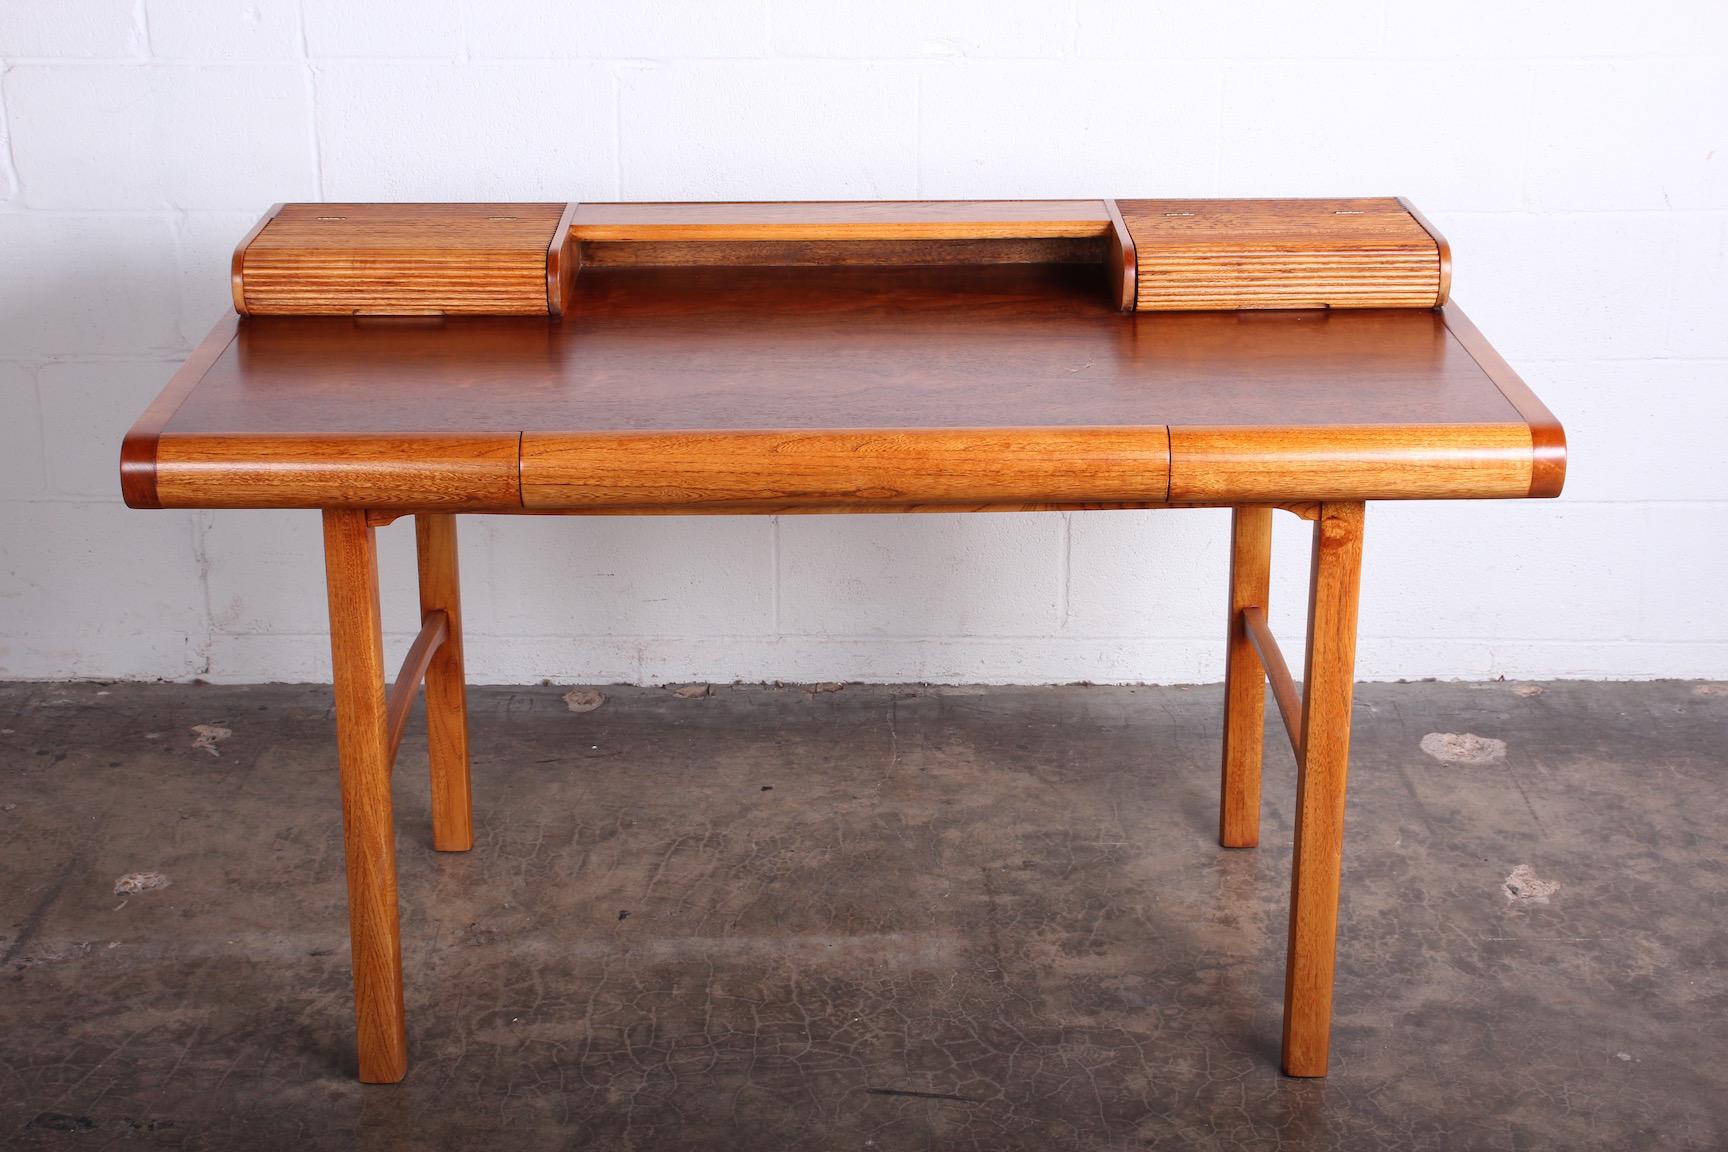 A nicely detailed petite desk by Baker. Oak and walnut with hinged compartments at top. 
Desktop height 28.75